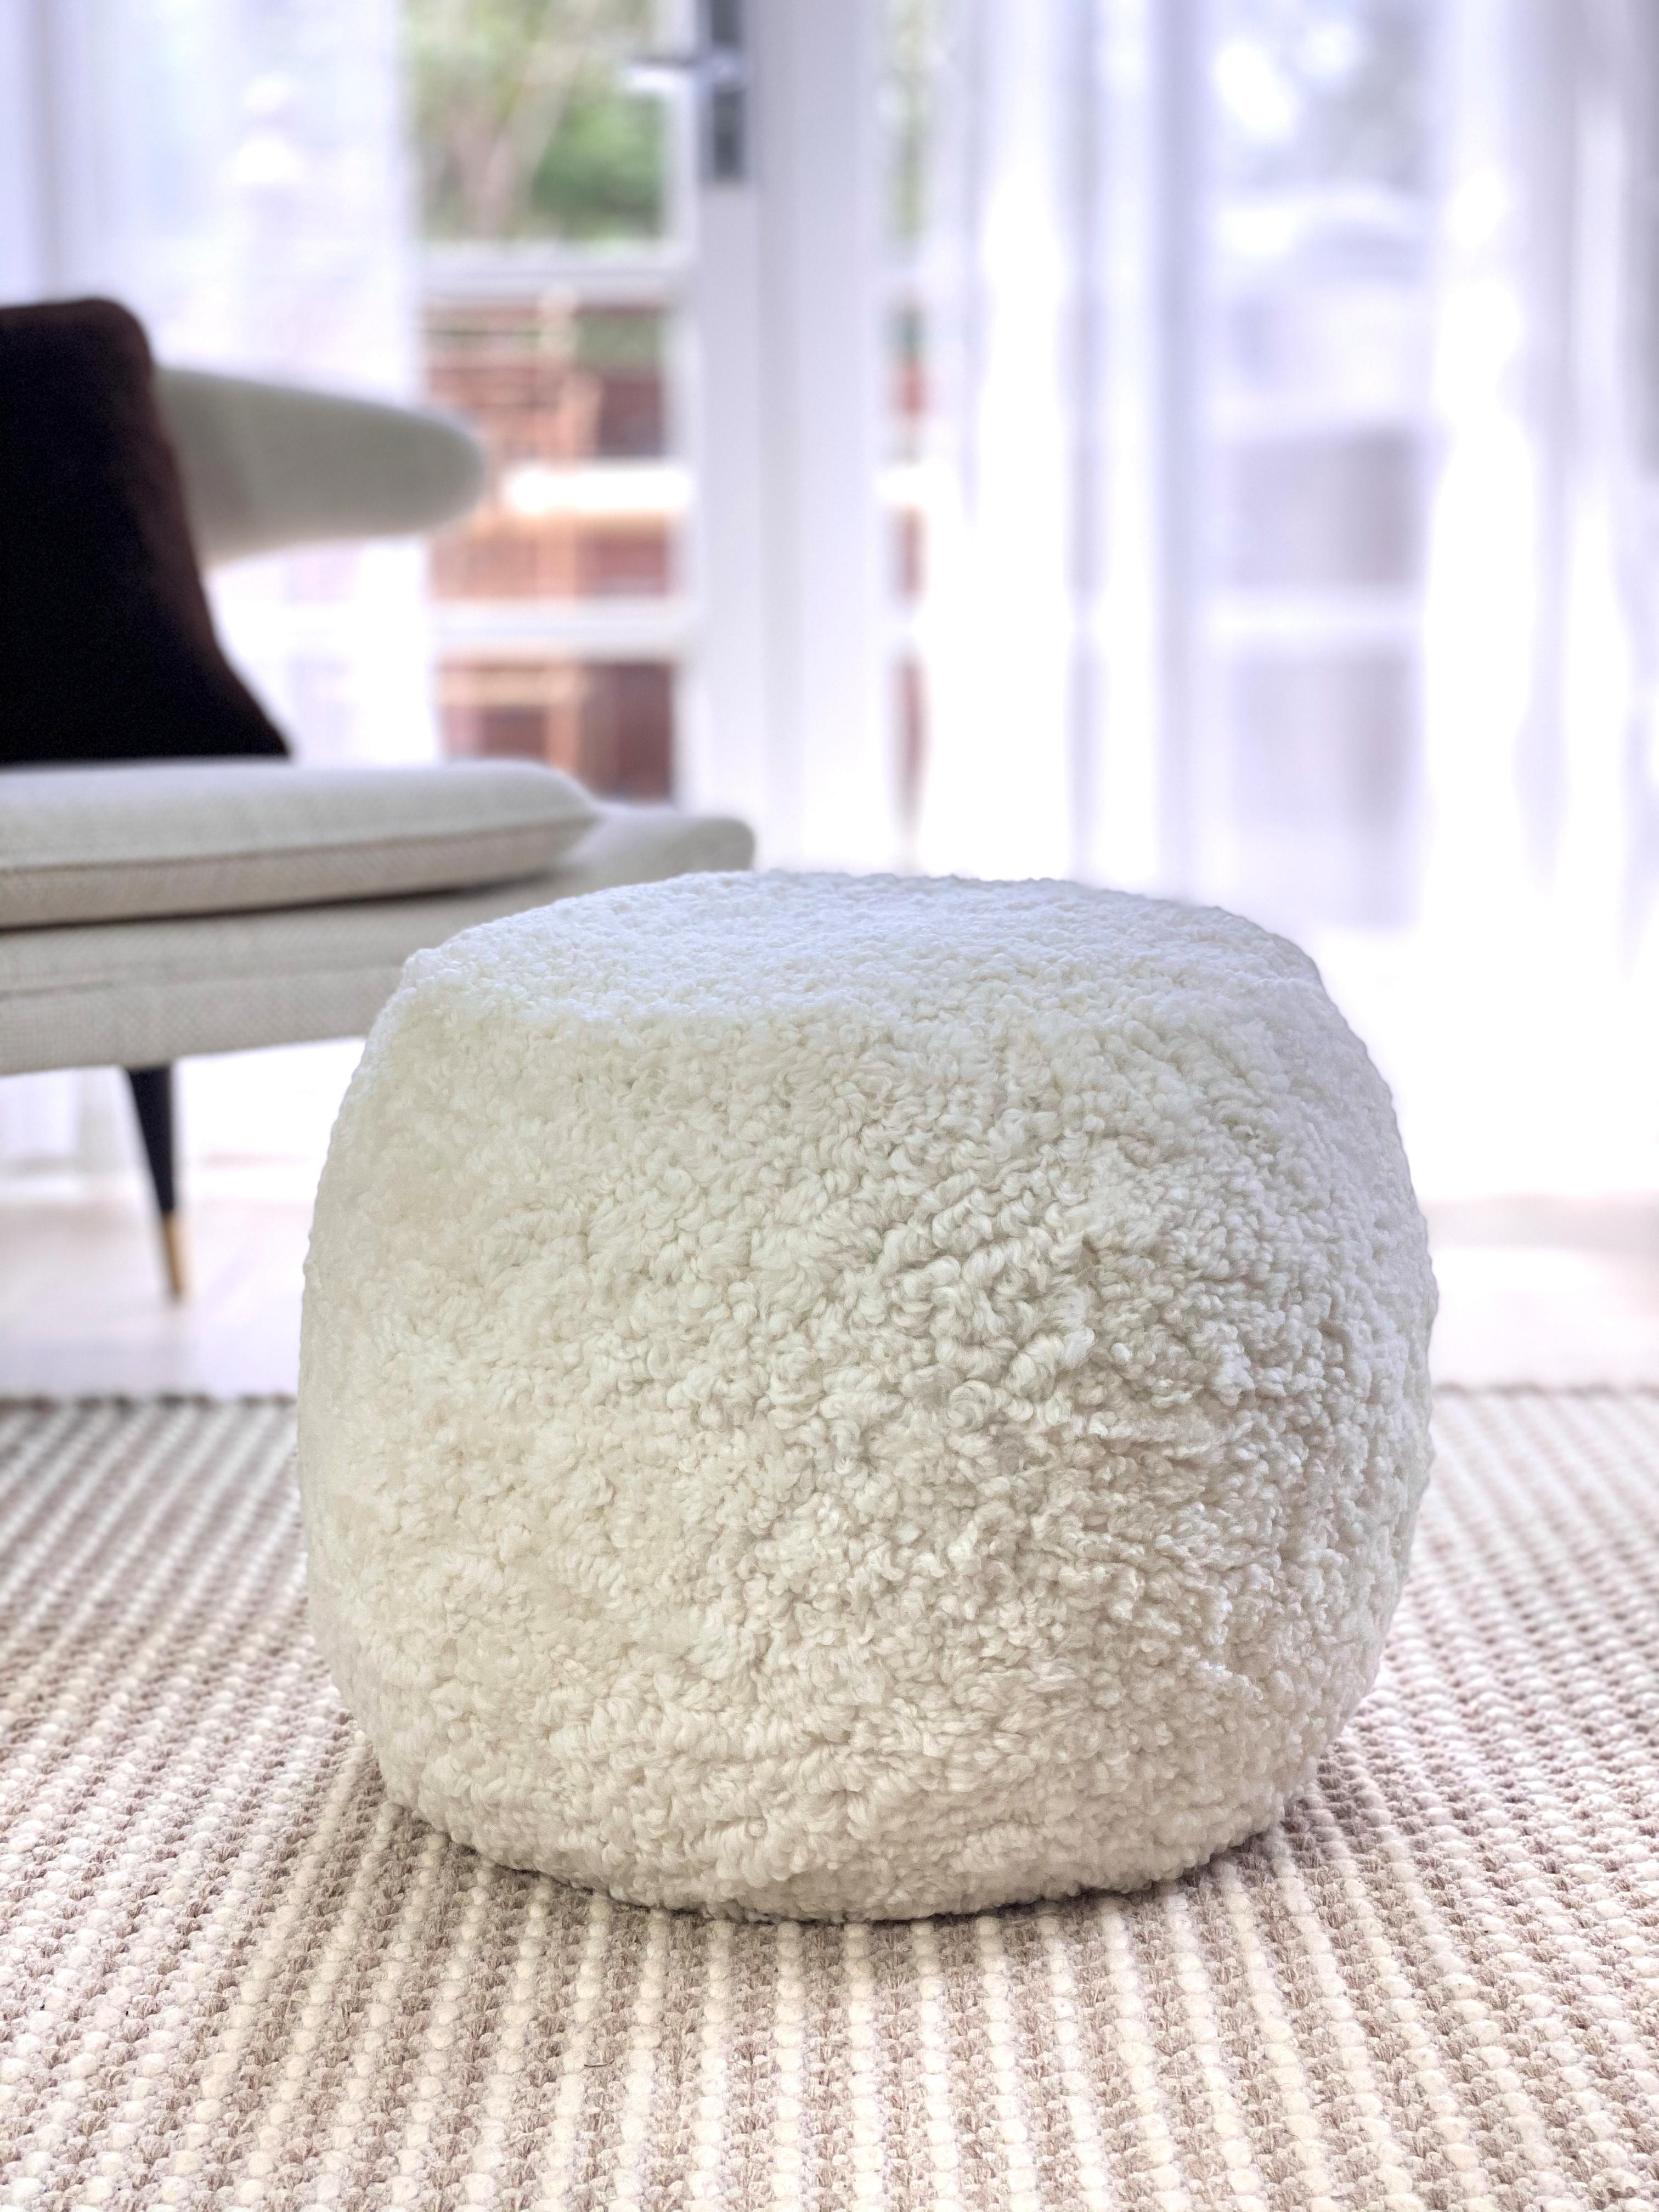 This strikingly elegant round boucle ottoman enhances the contemporary mood of an interior. Crafted from exquisite short curly wool, shearling sheepskin providing soft and natural textures to a space. 
Designed and made in Australia, the natural